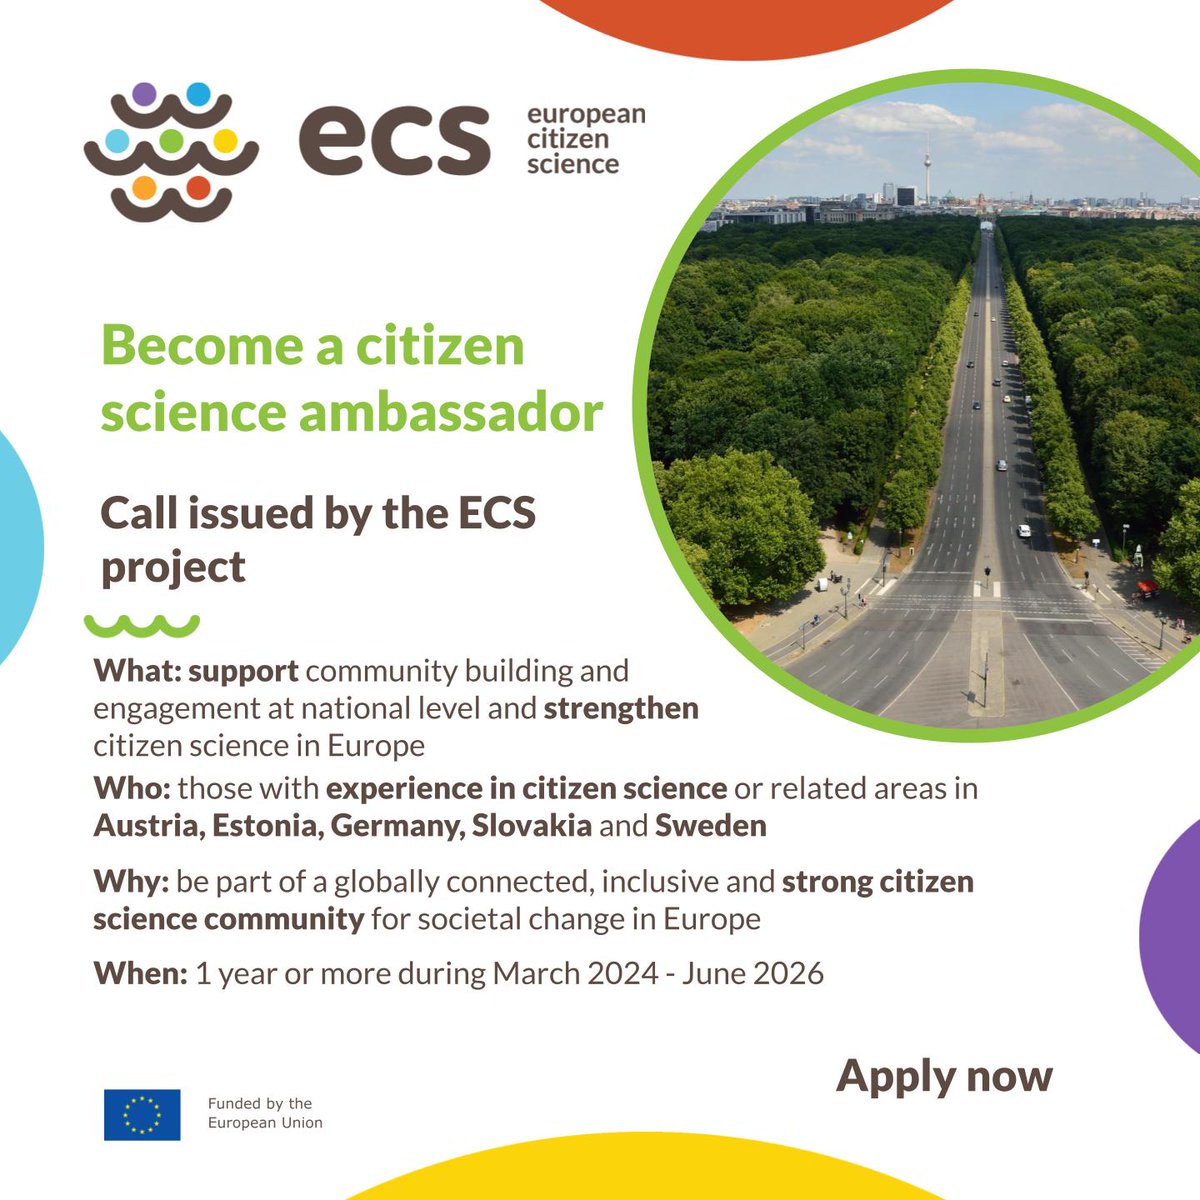 The @EUCitSciProject just launched a call for #CitizenScience ambassadors in Austria, Estonia, Germany, Slovakia, and Sweden! If you have experience in citizen science or related areas, apply now 🇦🇹 🇪🇪 🇩🇪 🇸🇰🇸🇪 Deadline is 16/01/2024 👉 eu-citizen.science/call_ambassado…